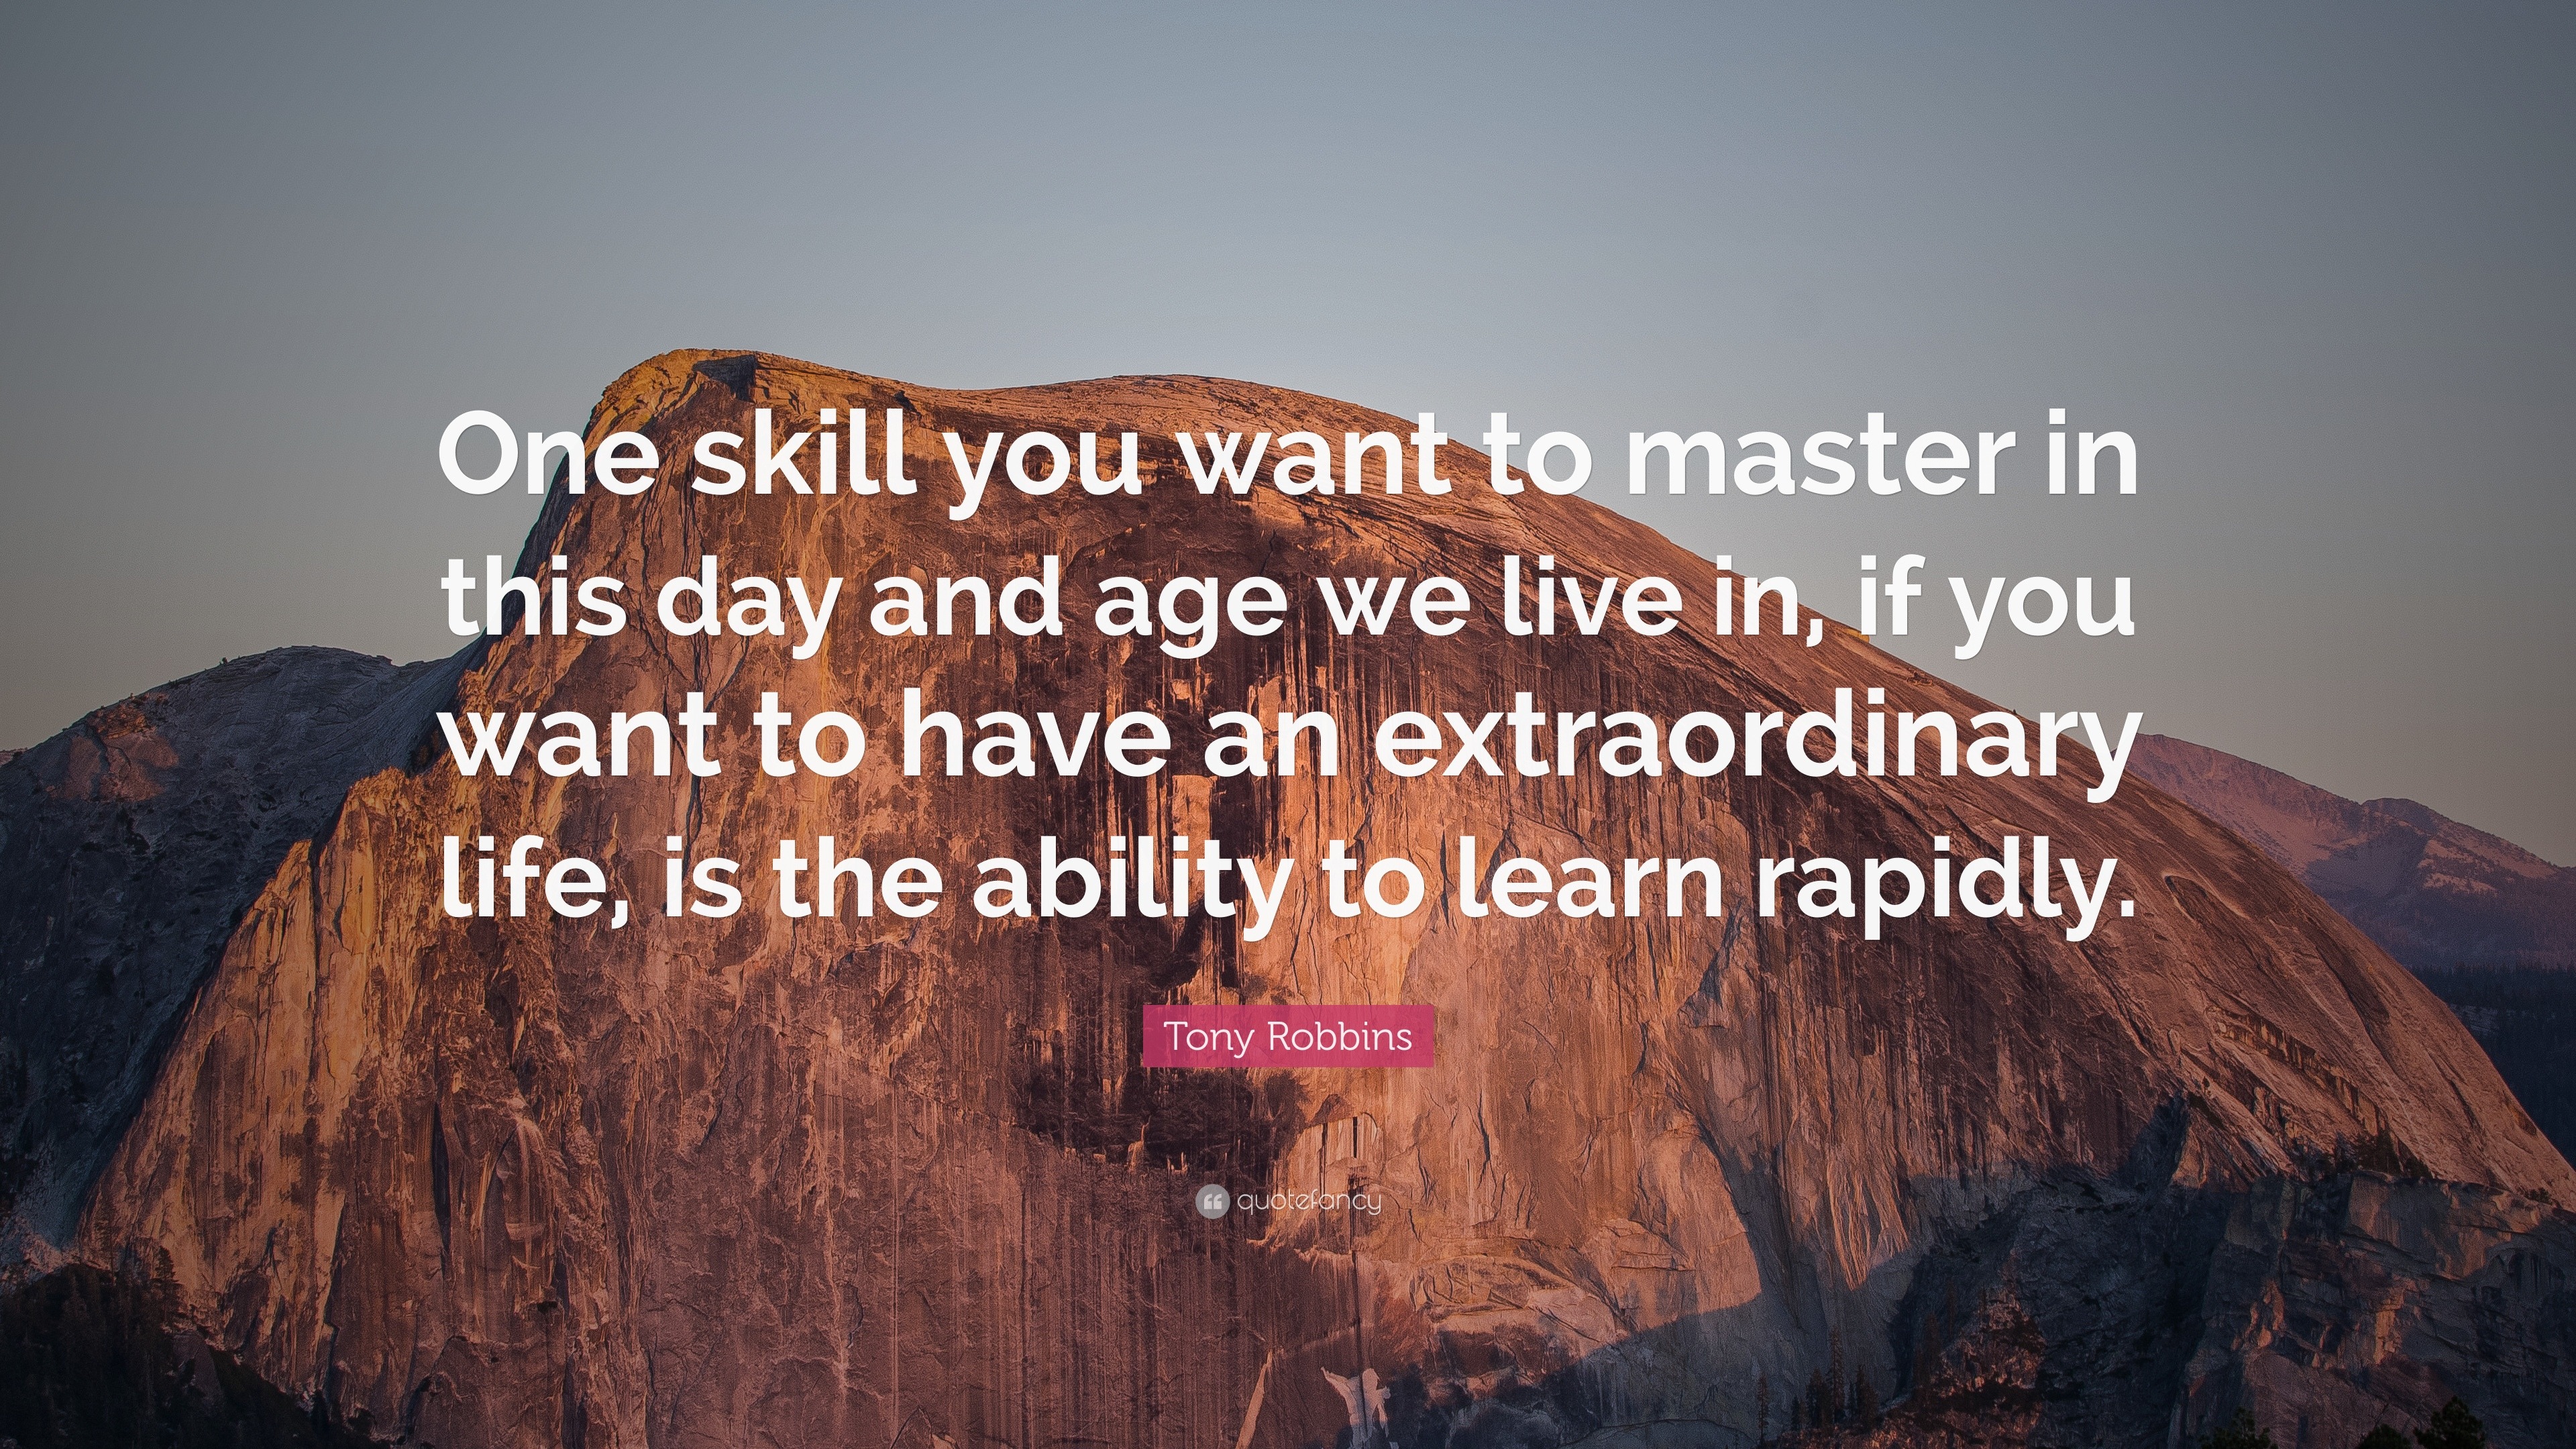 Tony Robbins Quote: “One skill you want to master in this day and